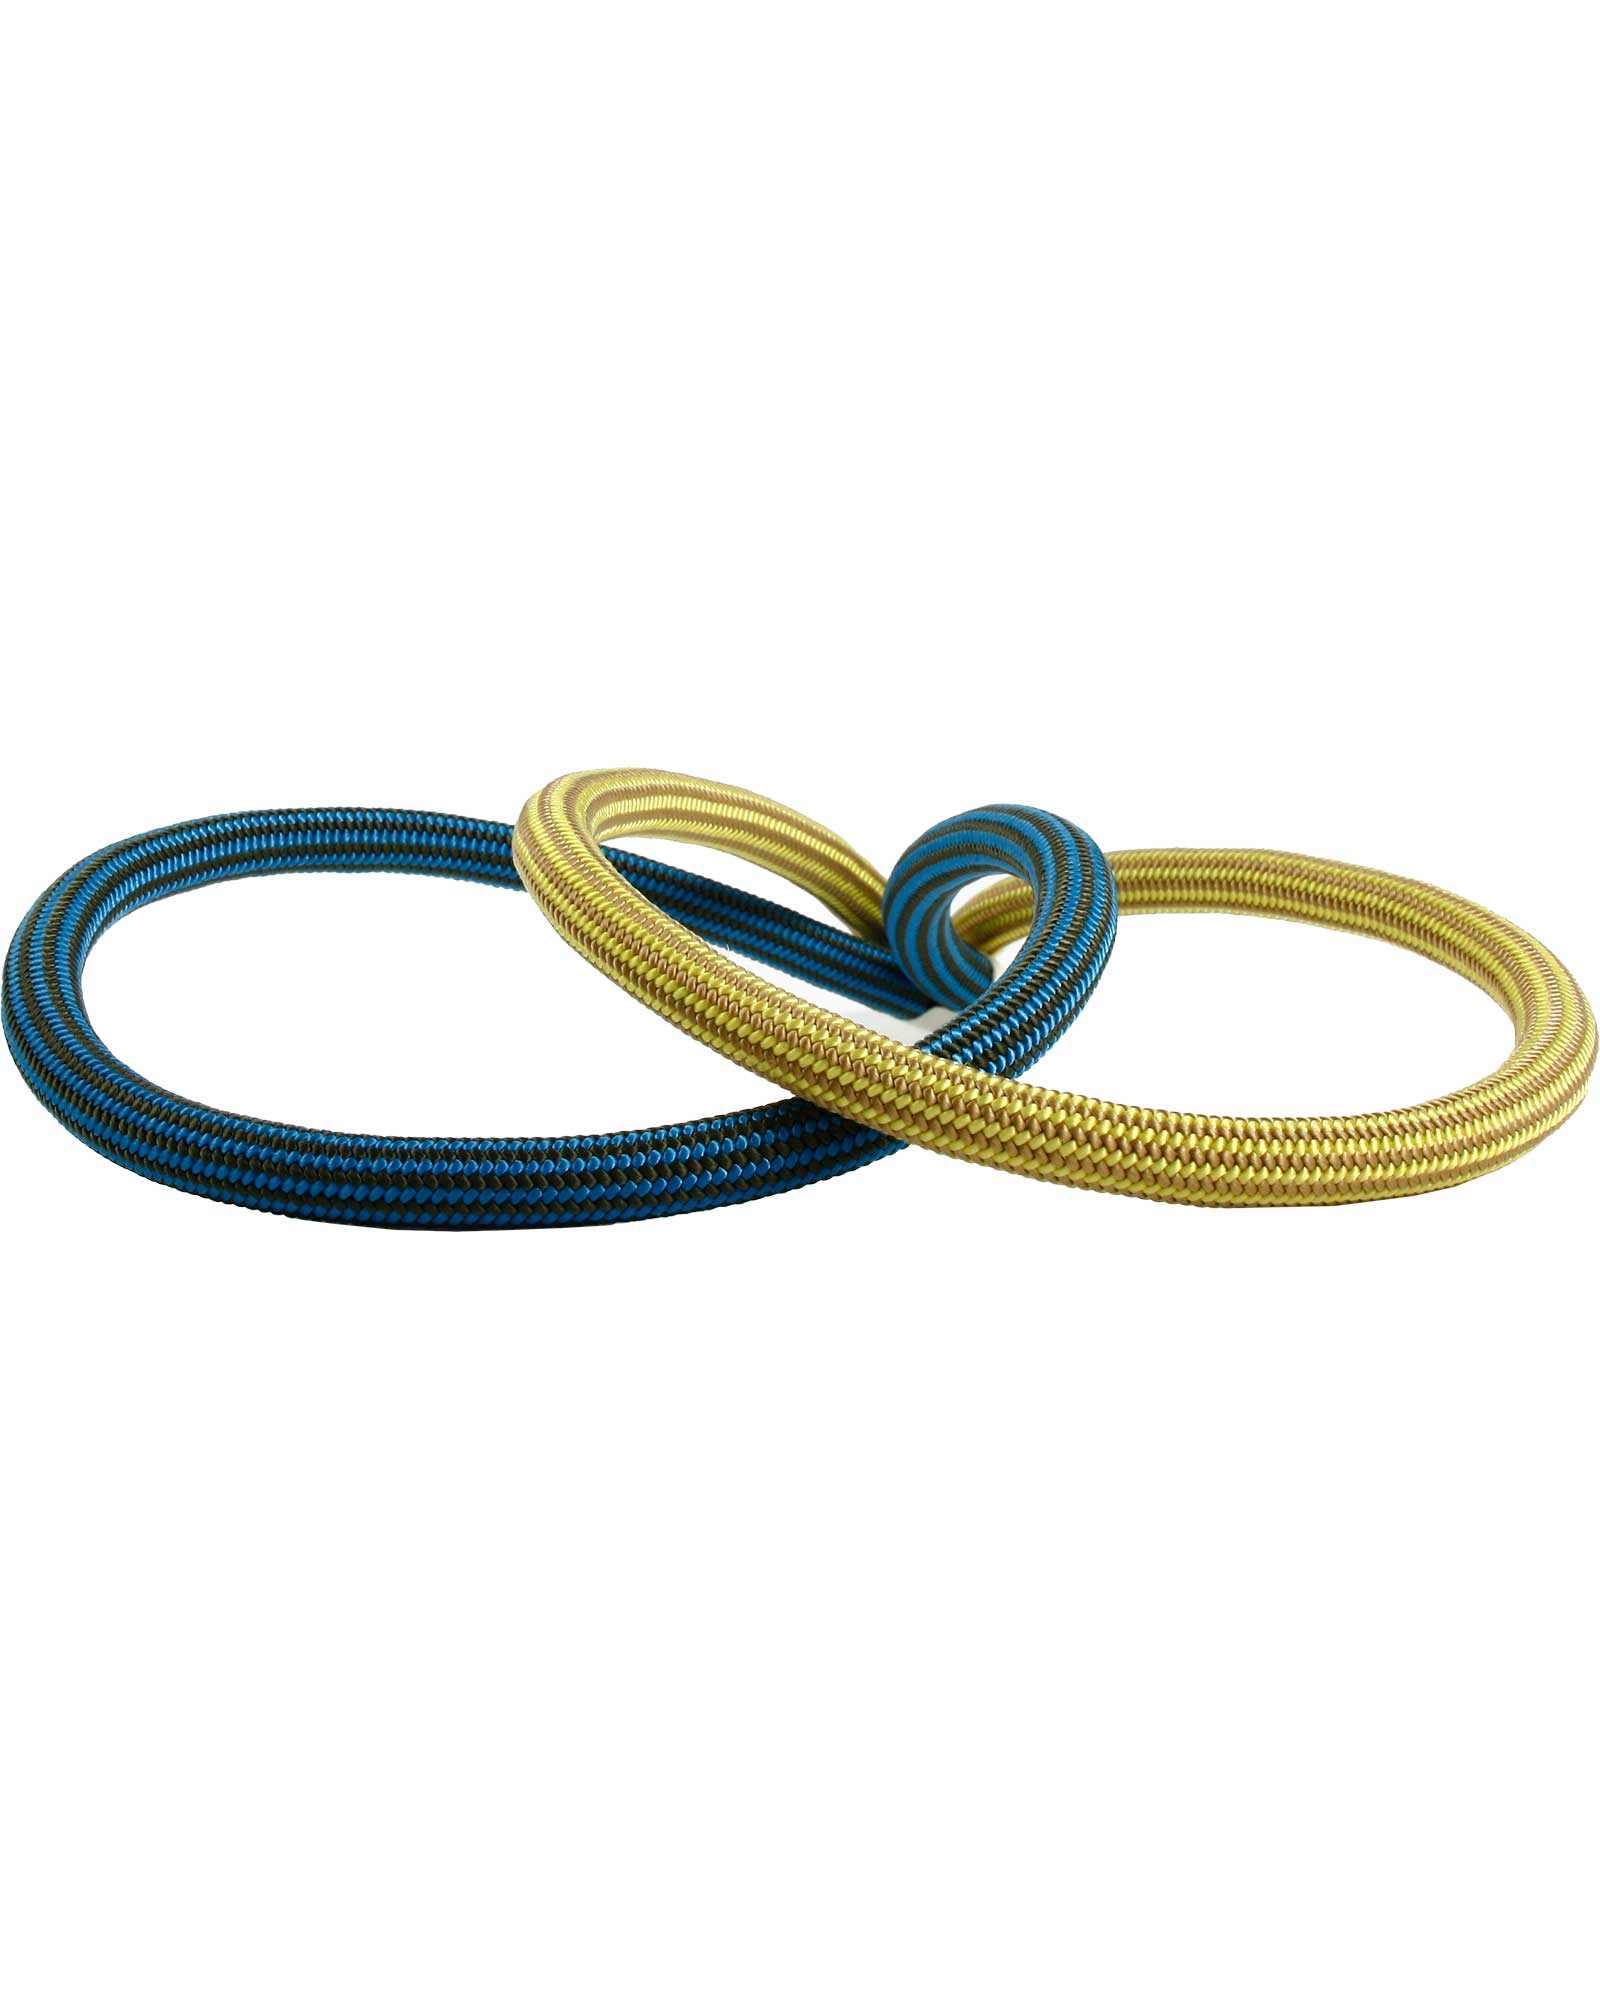 Edelweiss Lithium 8.5mm X 50m Rope